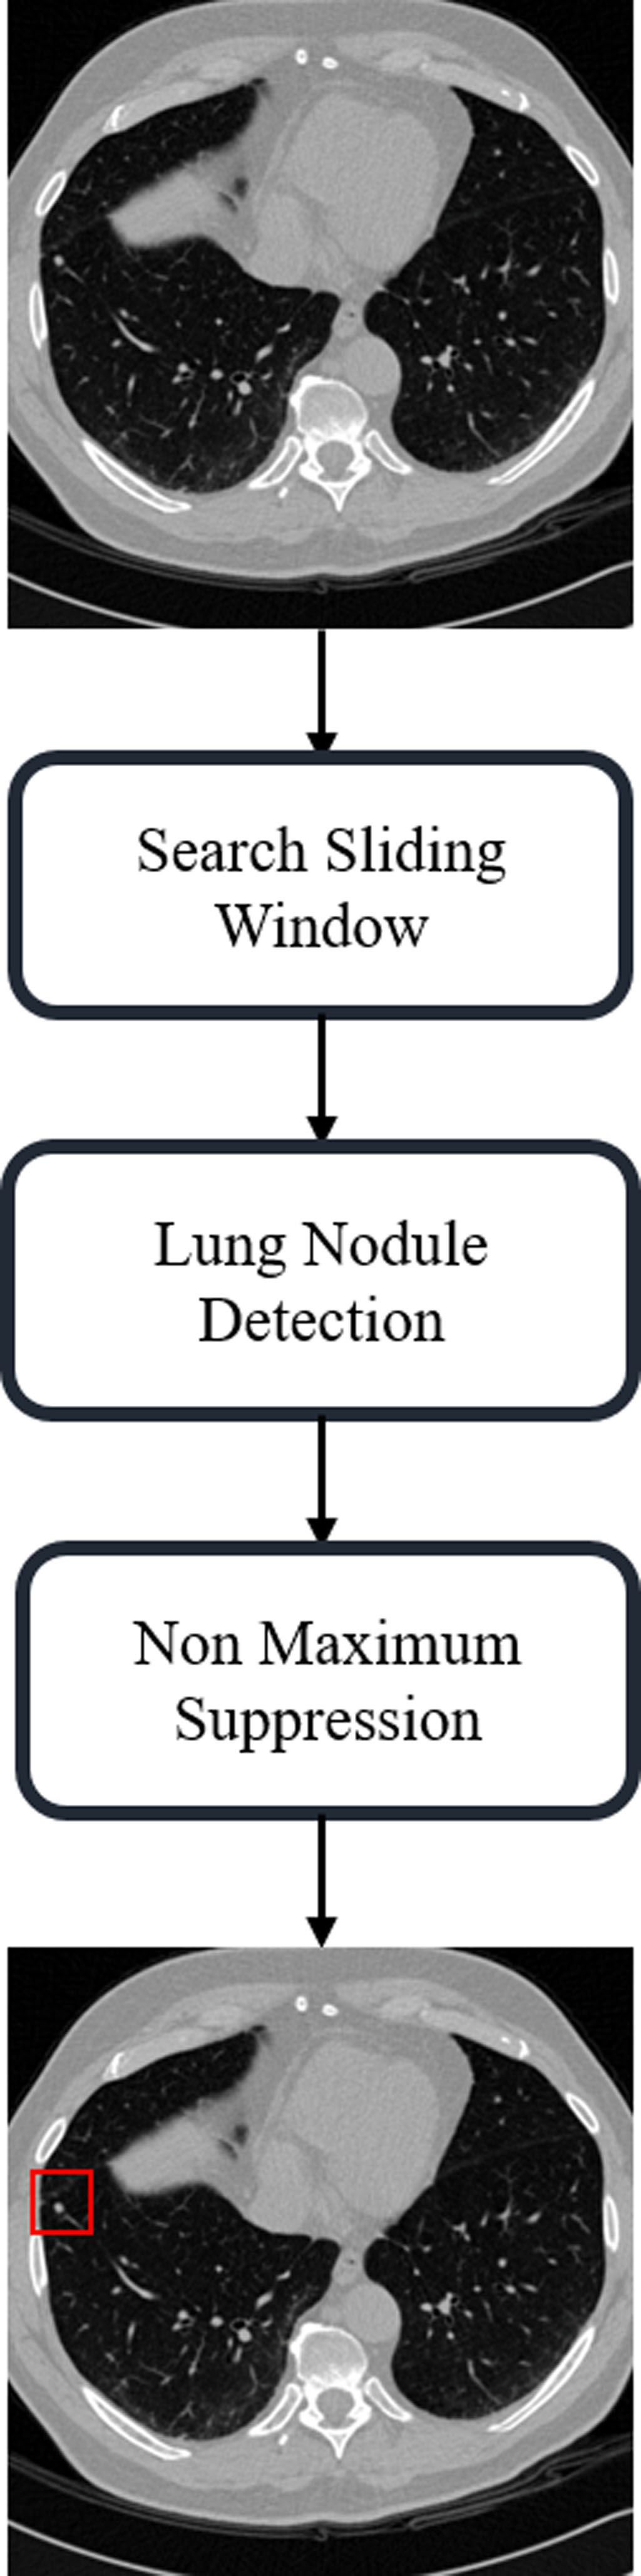 Using 3-D Capsule Network for Nodule Detection in Lung CT Image